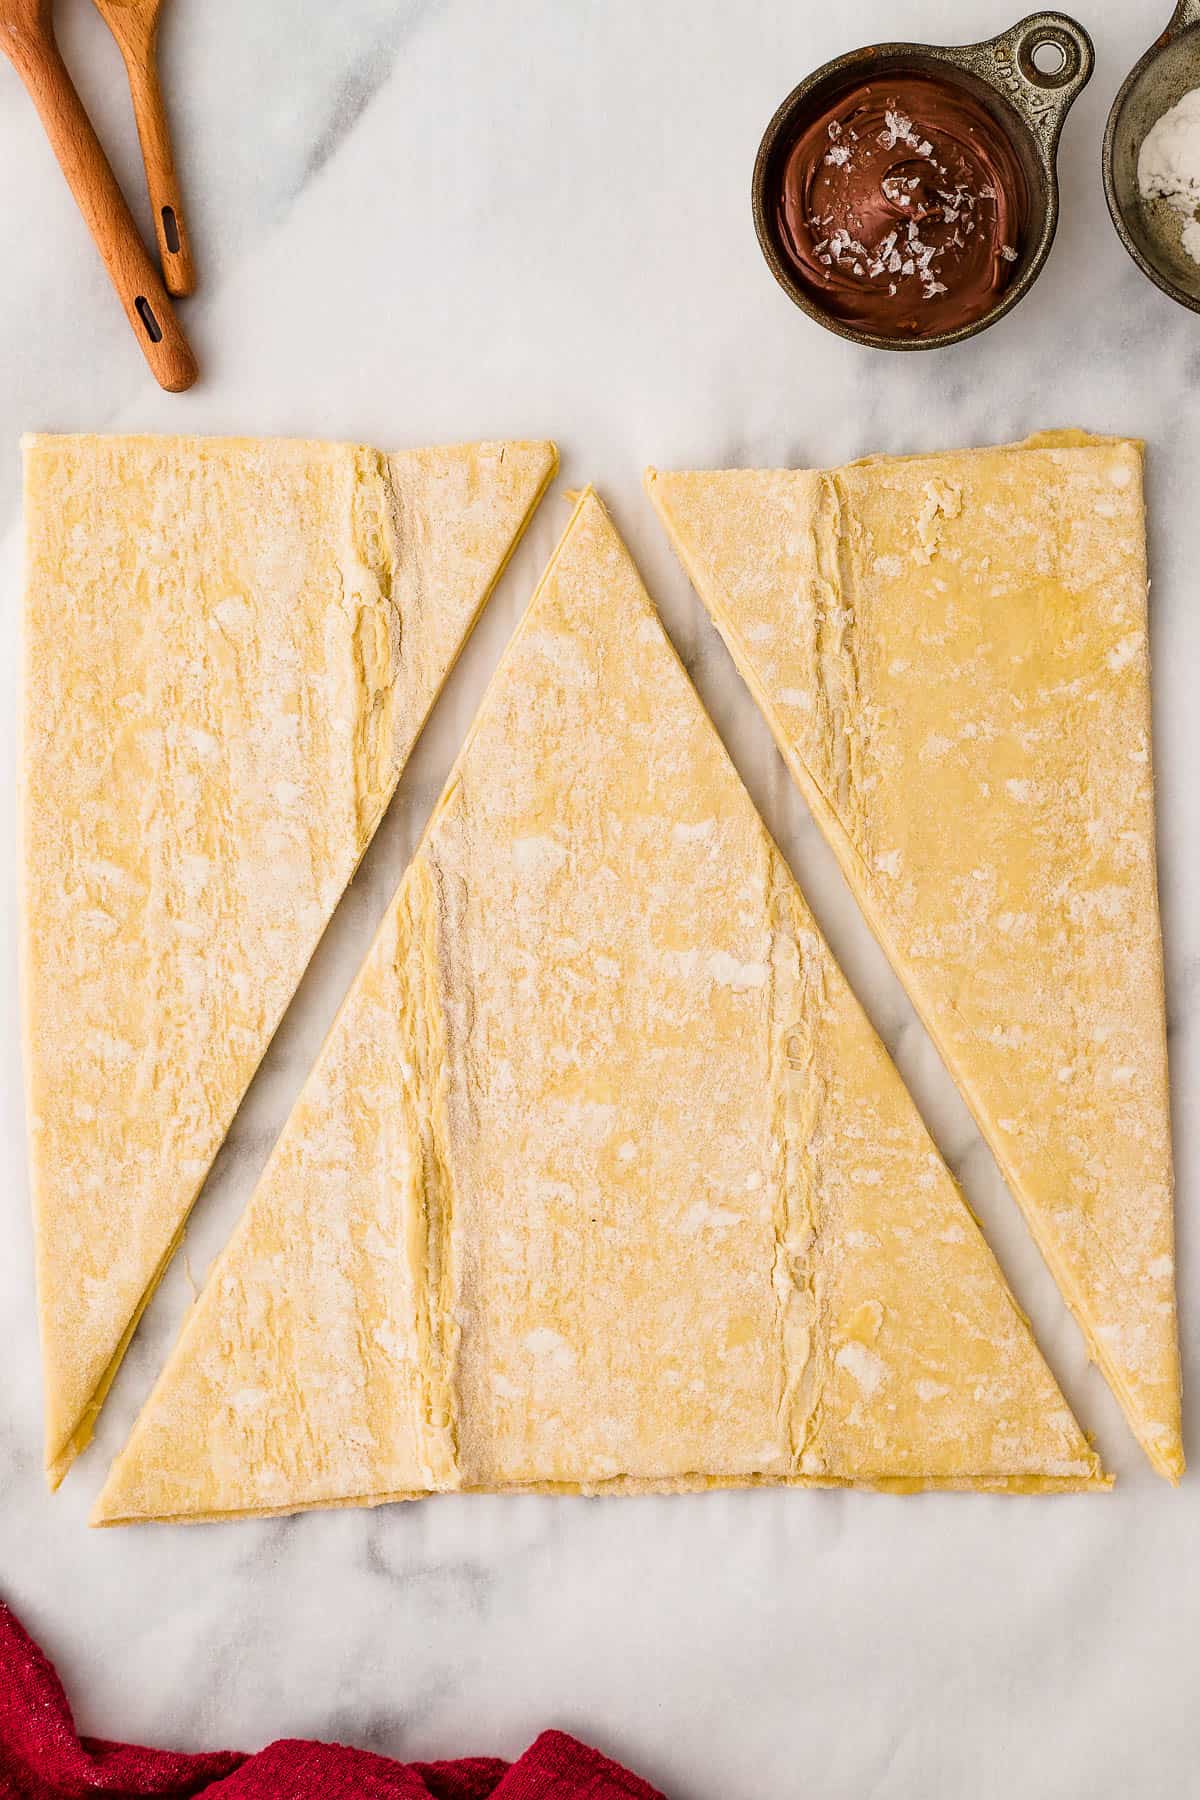 puff pastry sheet cut into 3 pieces to shape it into a christmas tree.